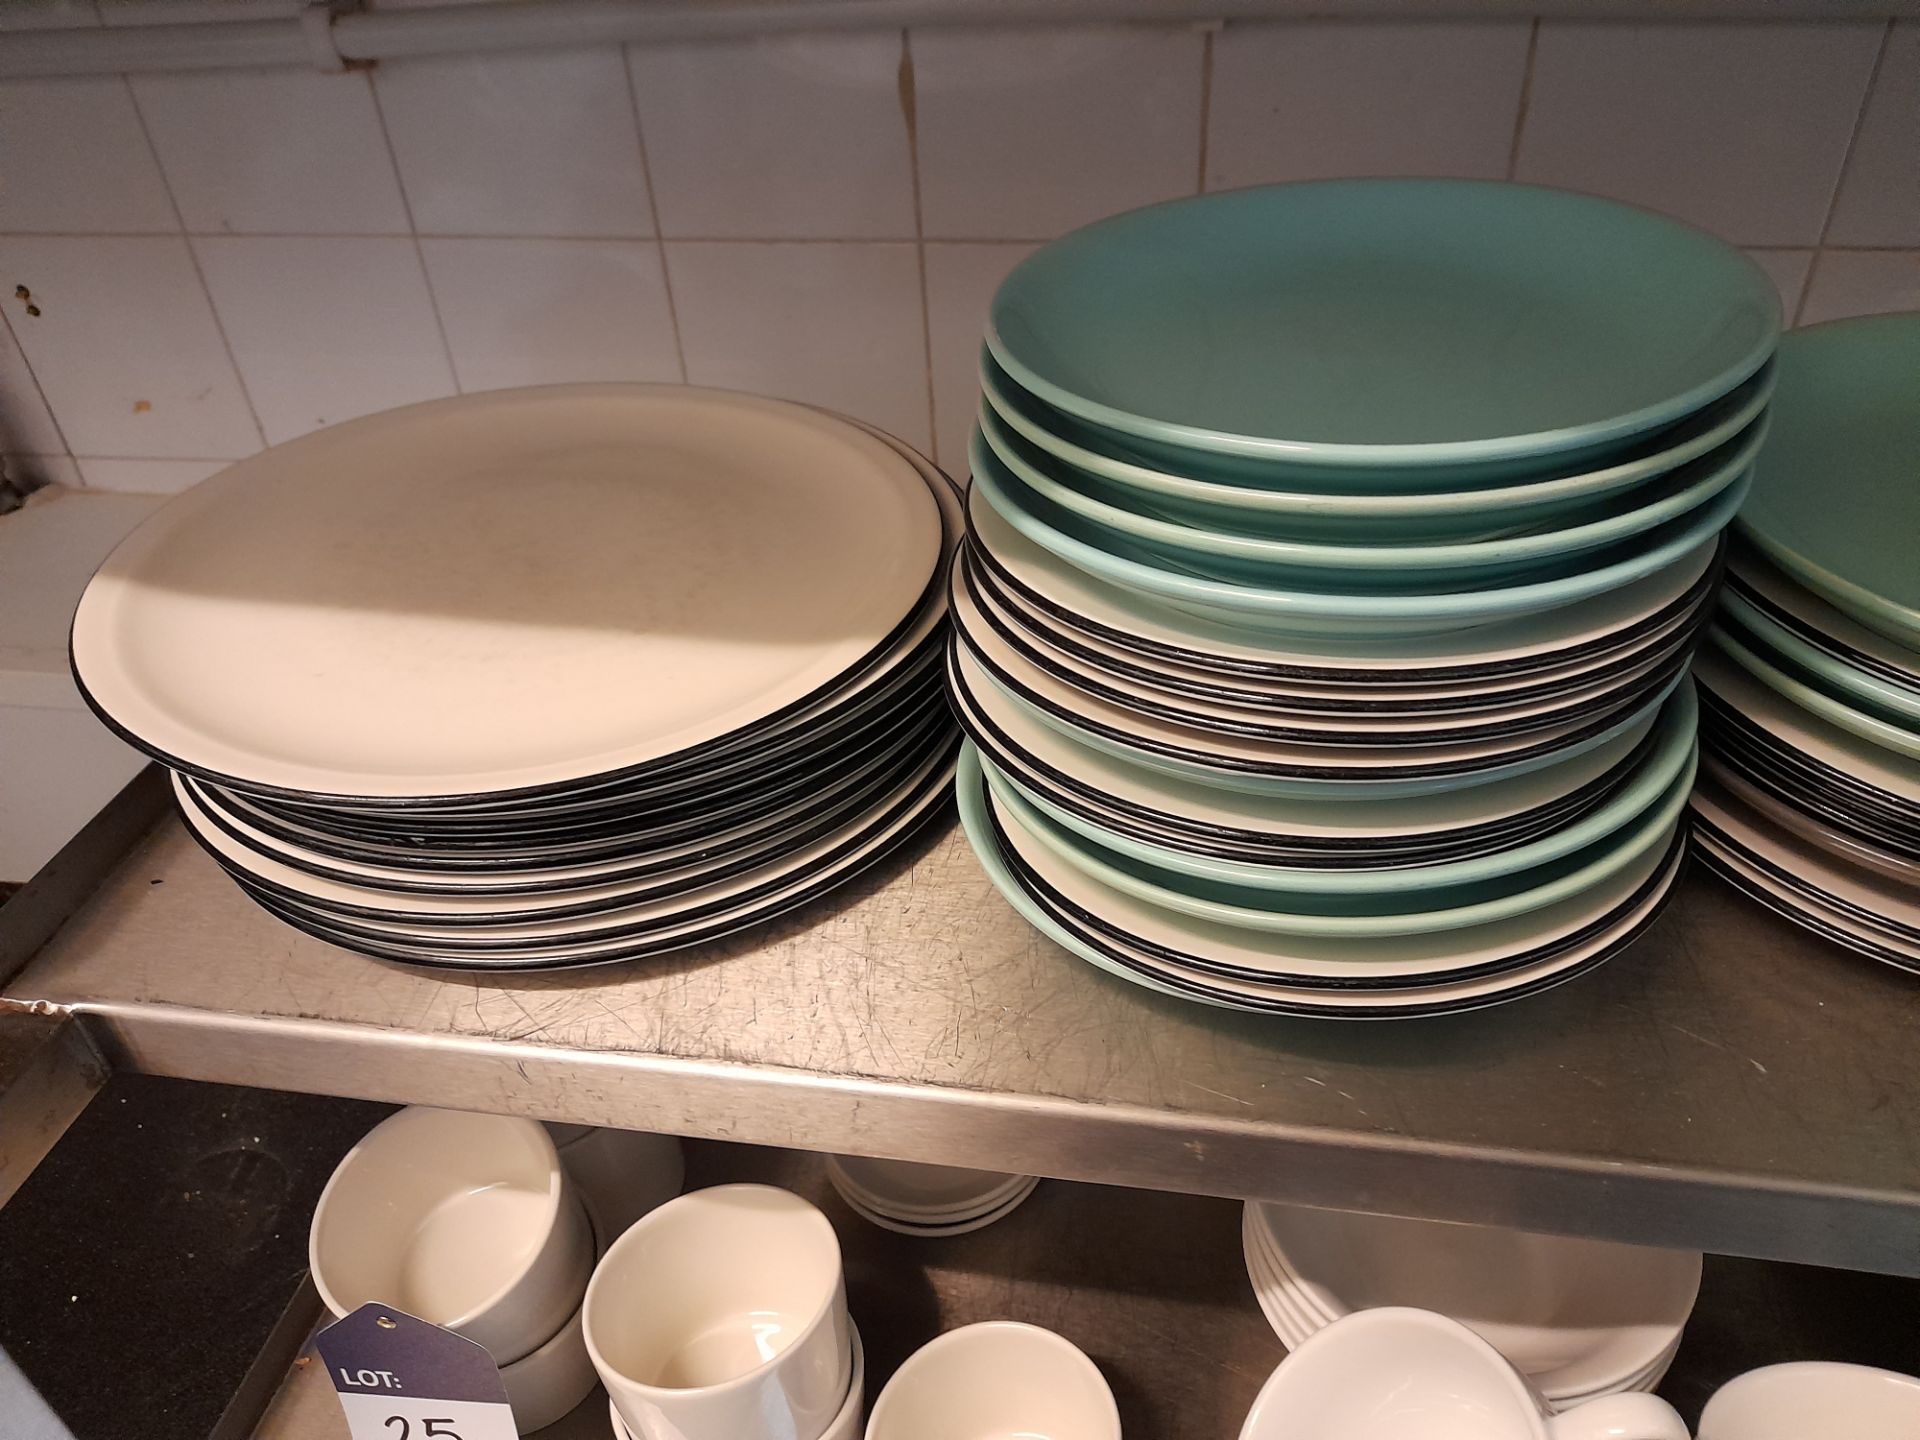 Assortment of crockery to trolley, to include plates, cups, saucers, etc - Image 5 of 5